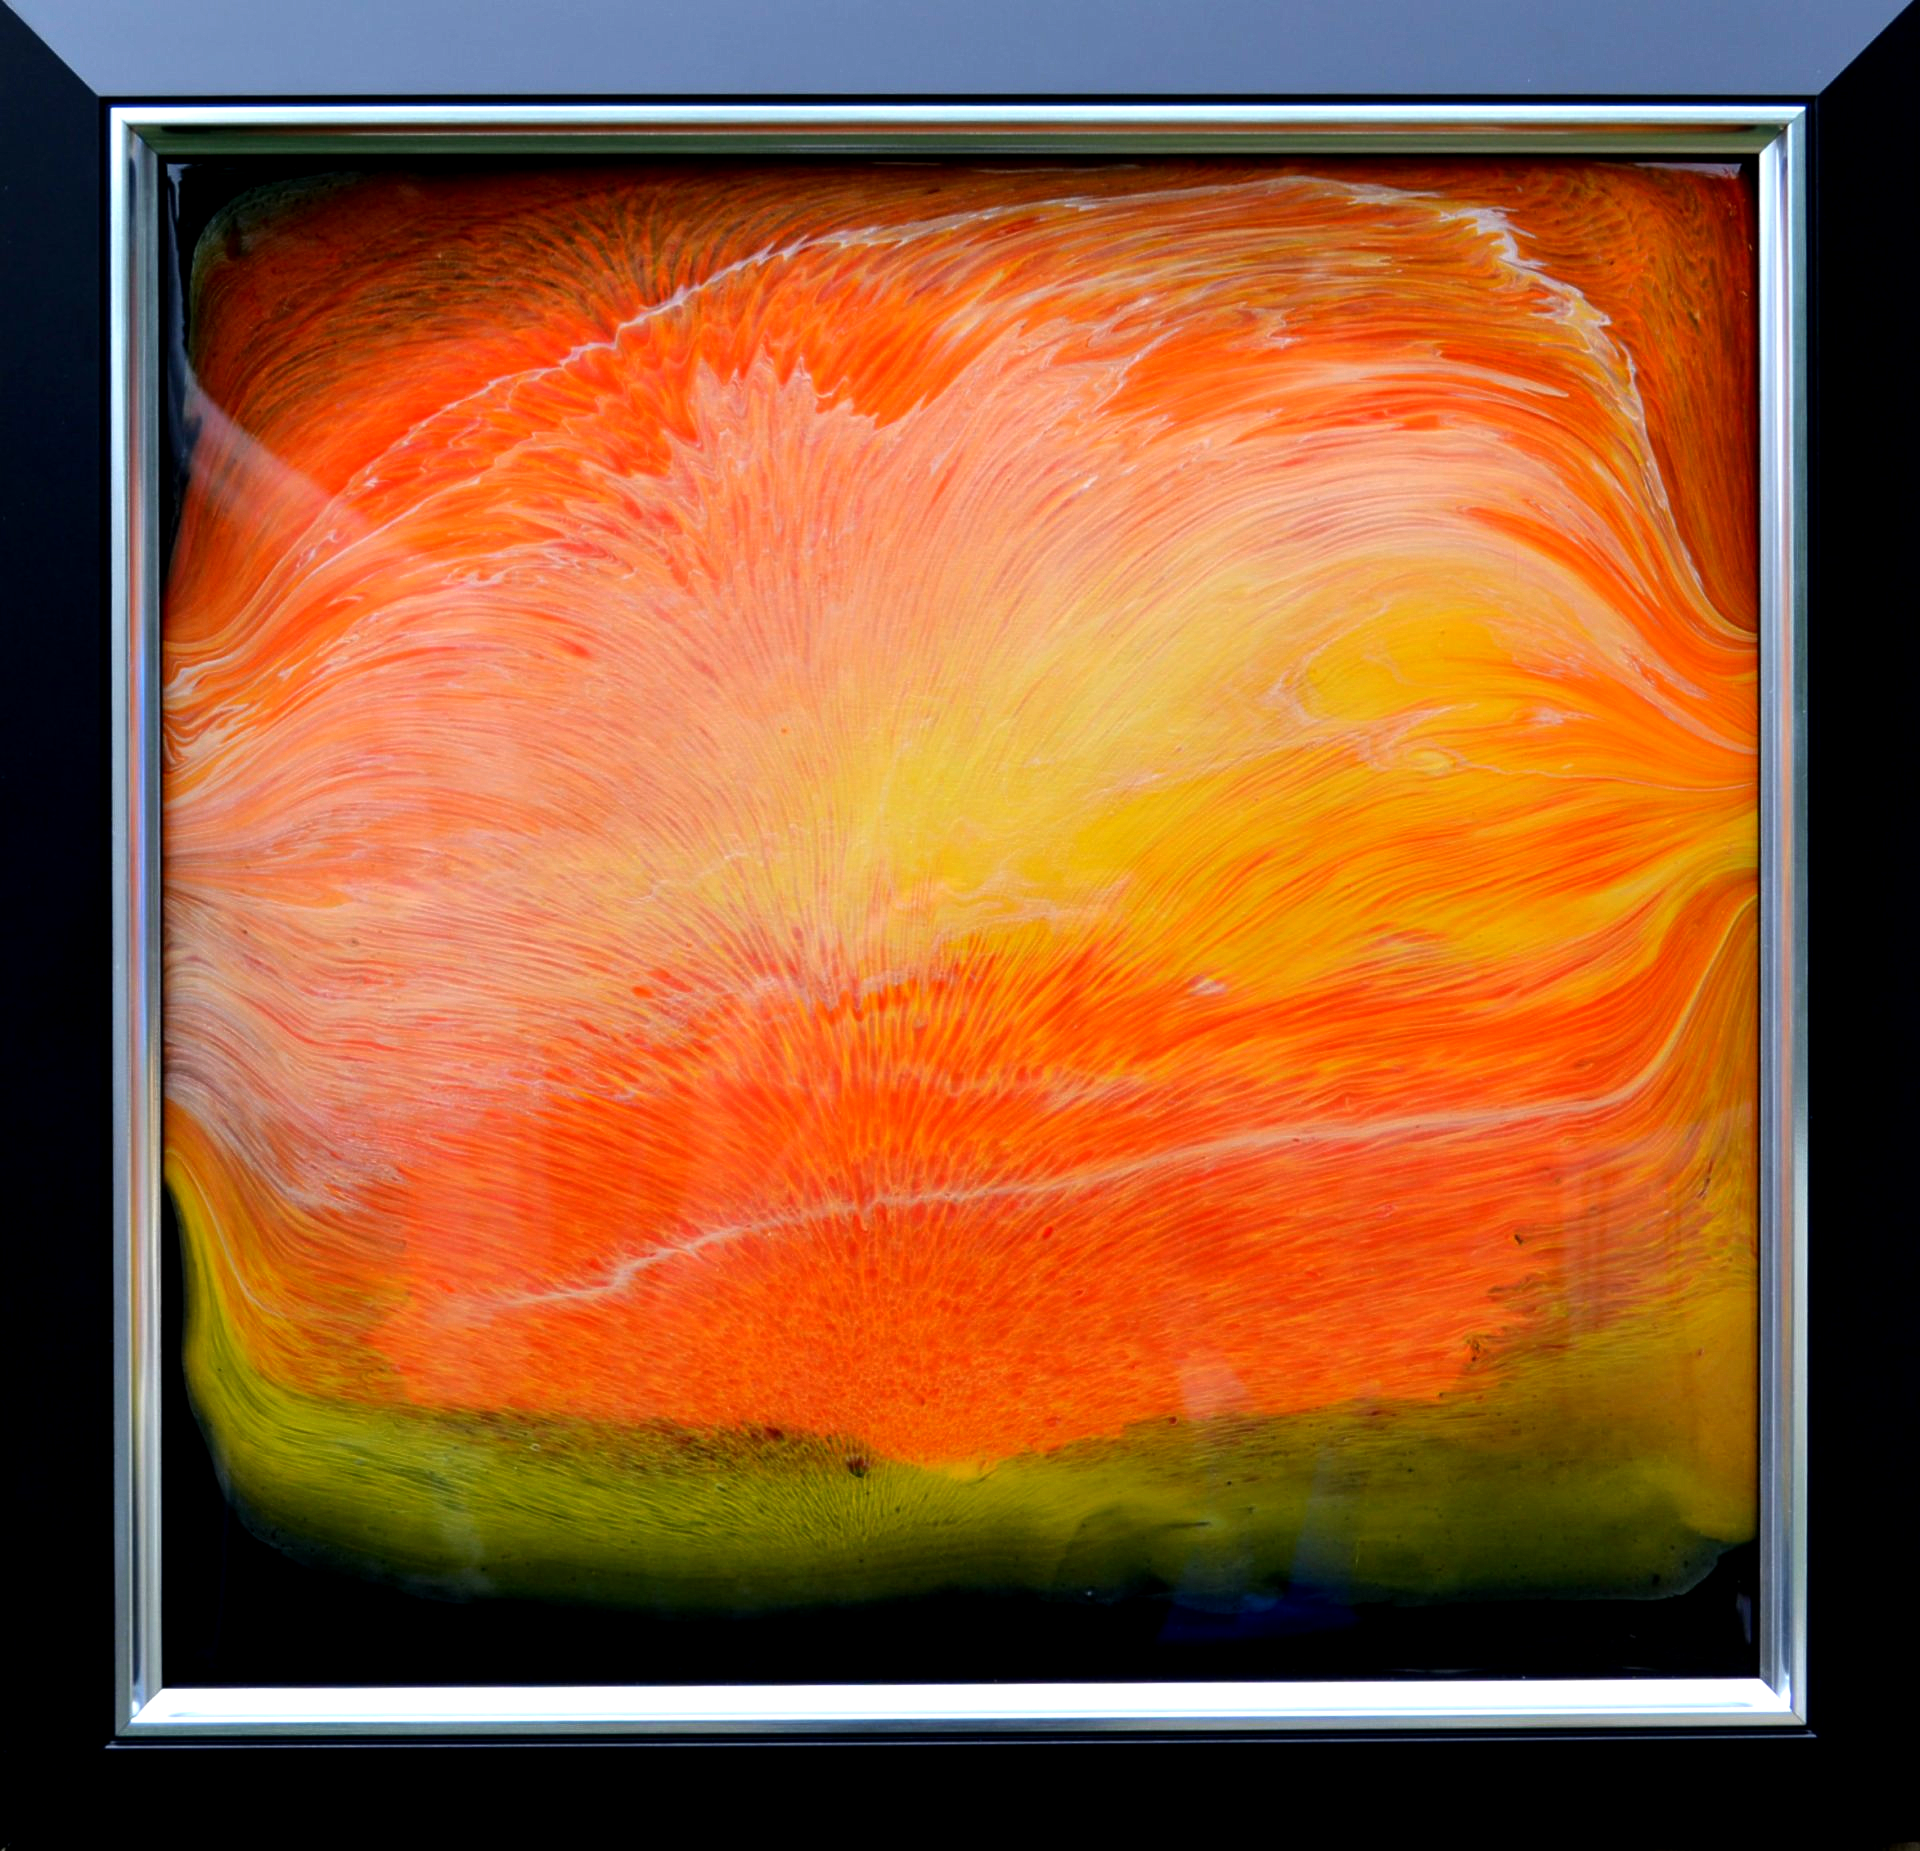 Sun Dance Original abstract painting with Orange, yellow and black representing the sun rise. Meditative piece.